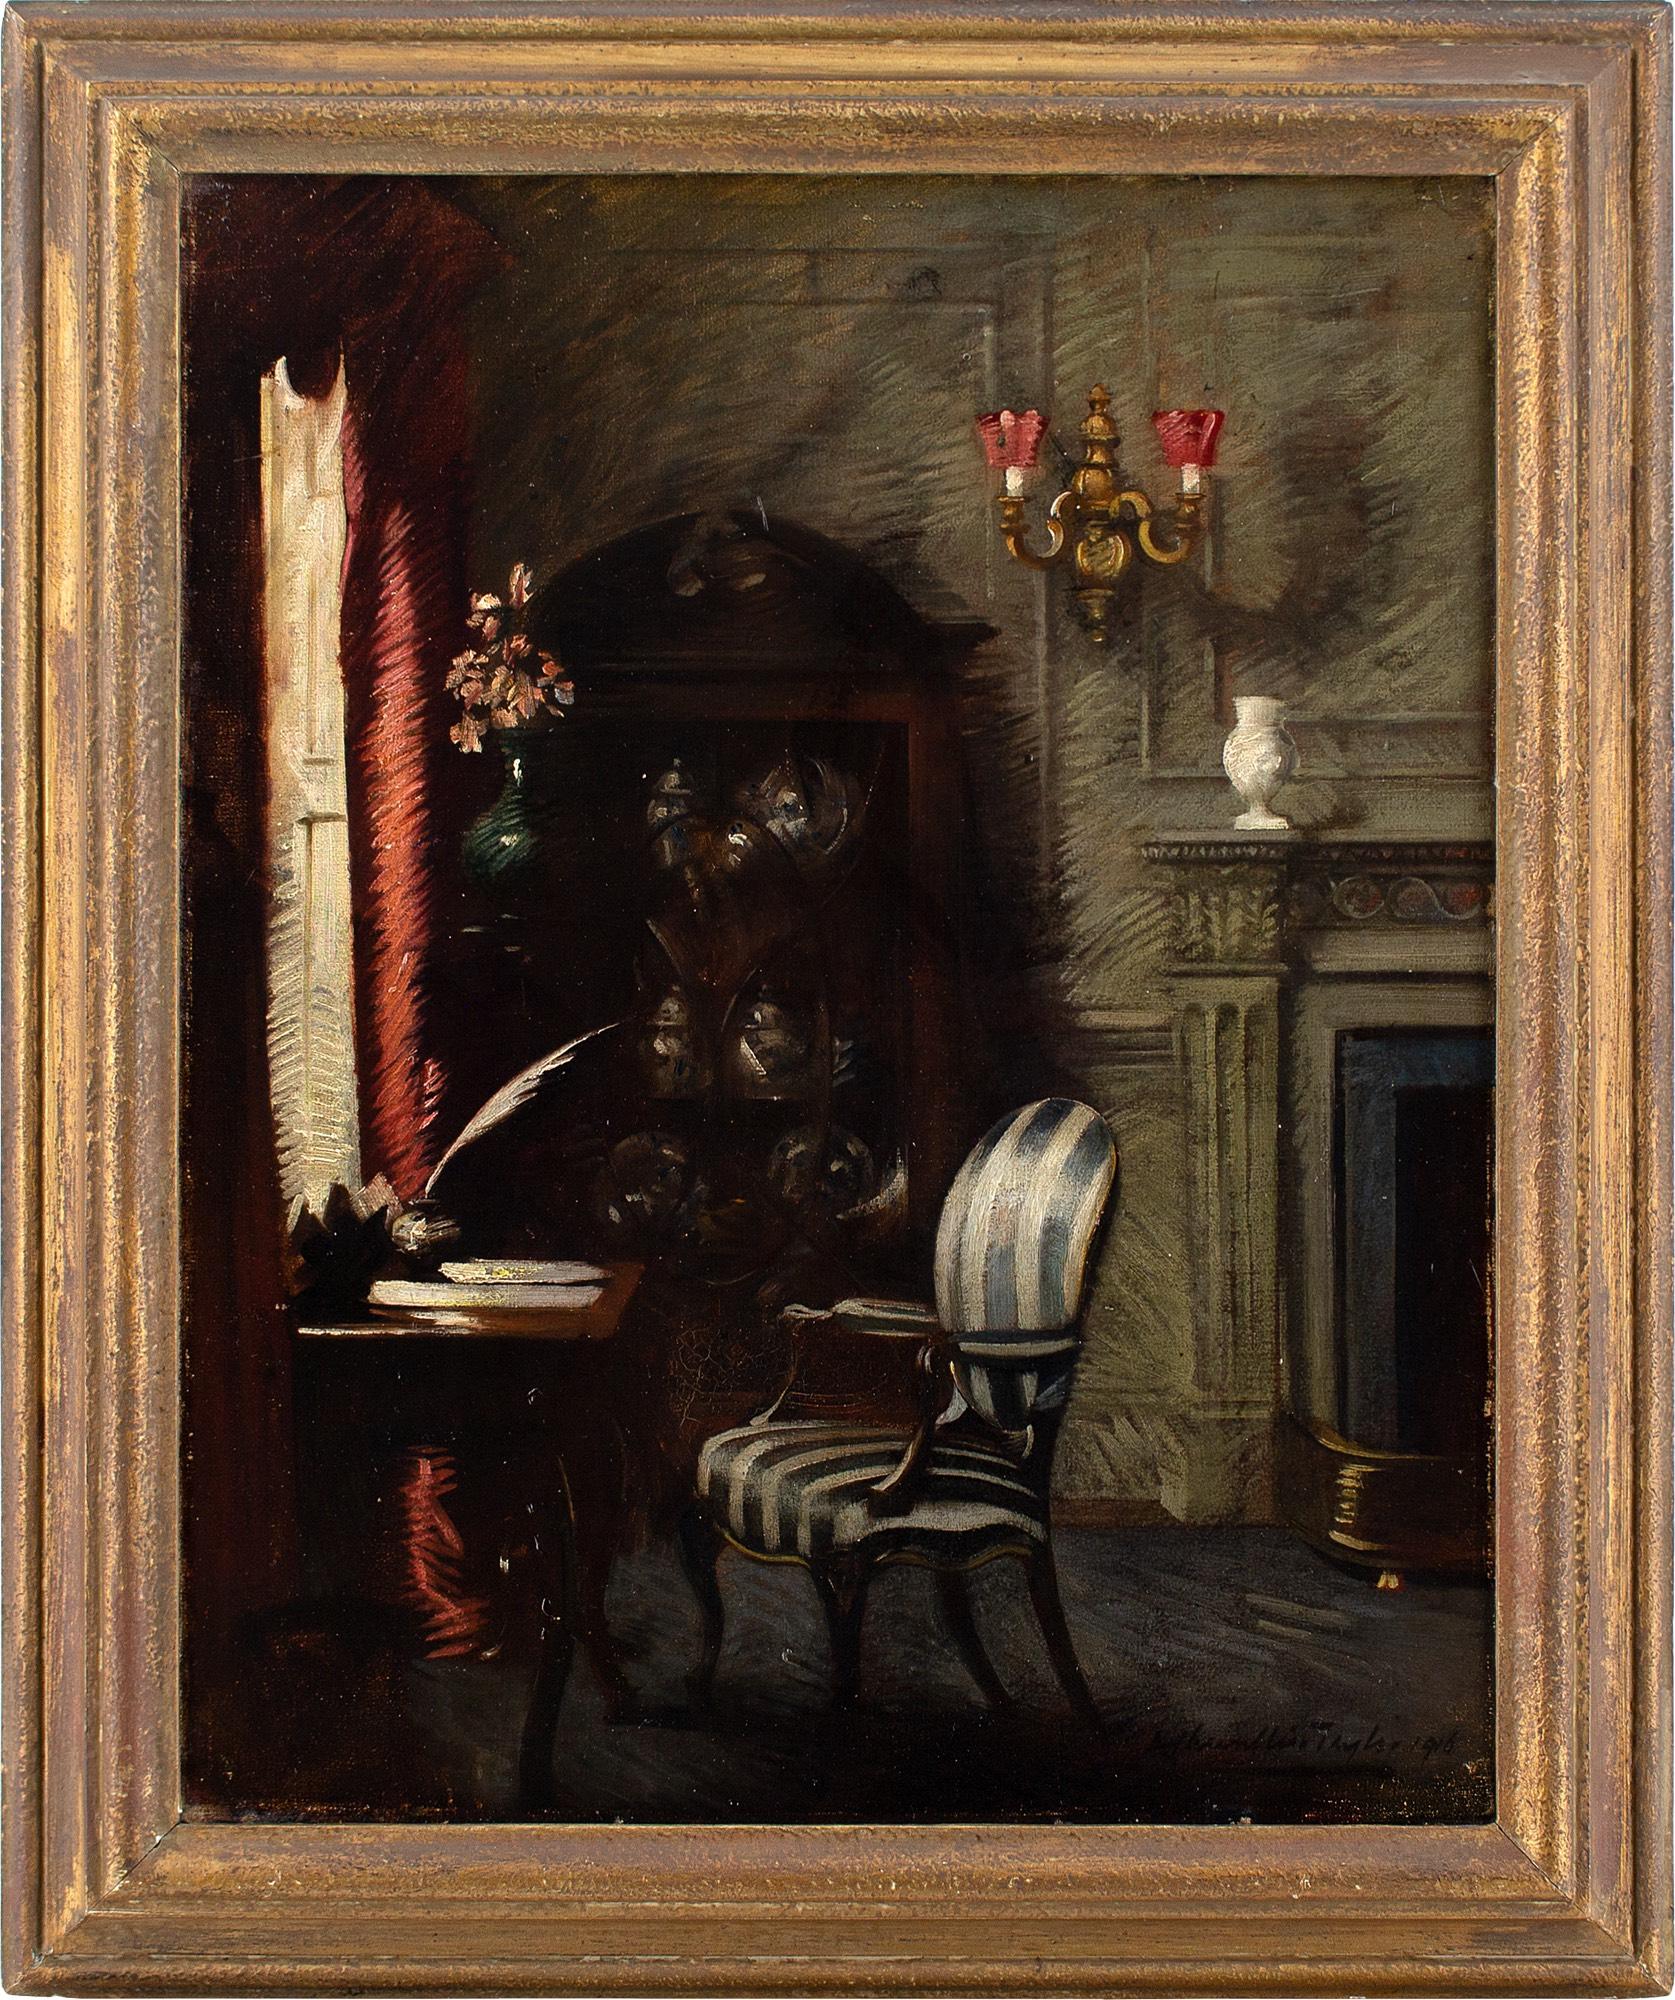 This early 20th-century oil painting by British artist Albert Chevallier Tayler (1862-1925) depicts a quiet study with chair, table and various ornaments.

Albert Chevallier Tayler was an esteemed painter of portraits, country scenes, military, and